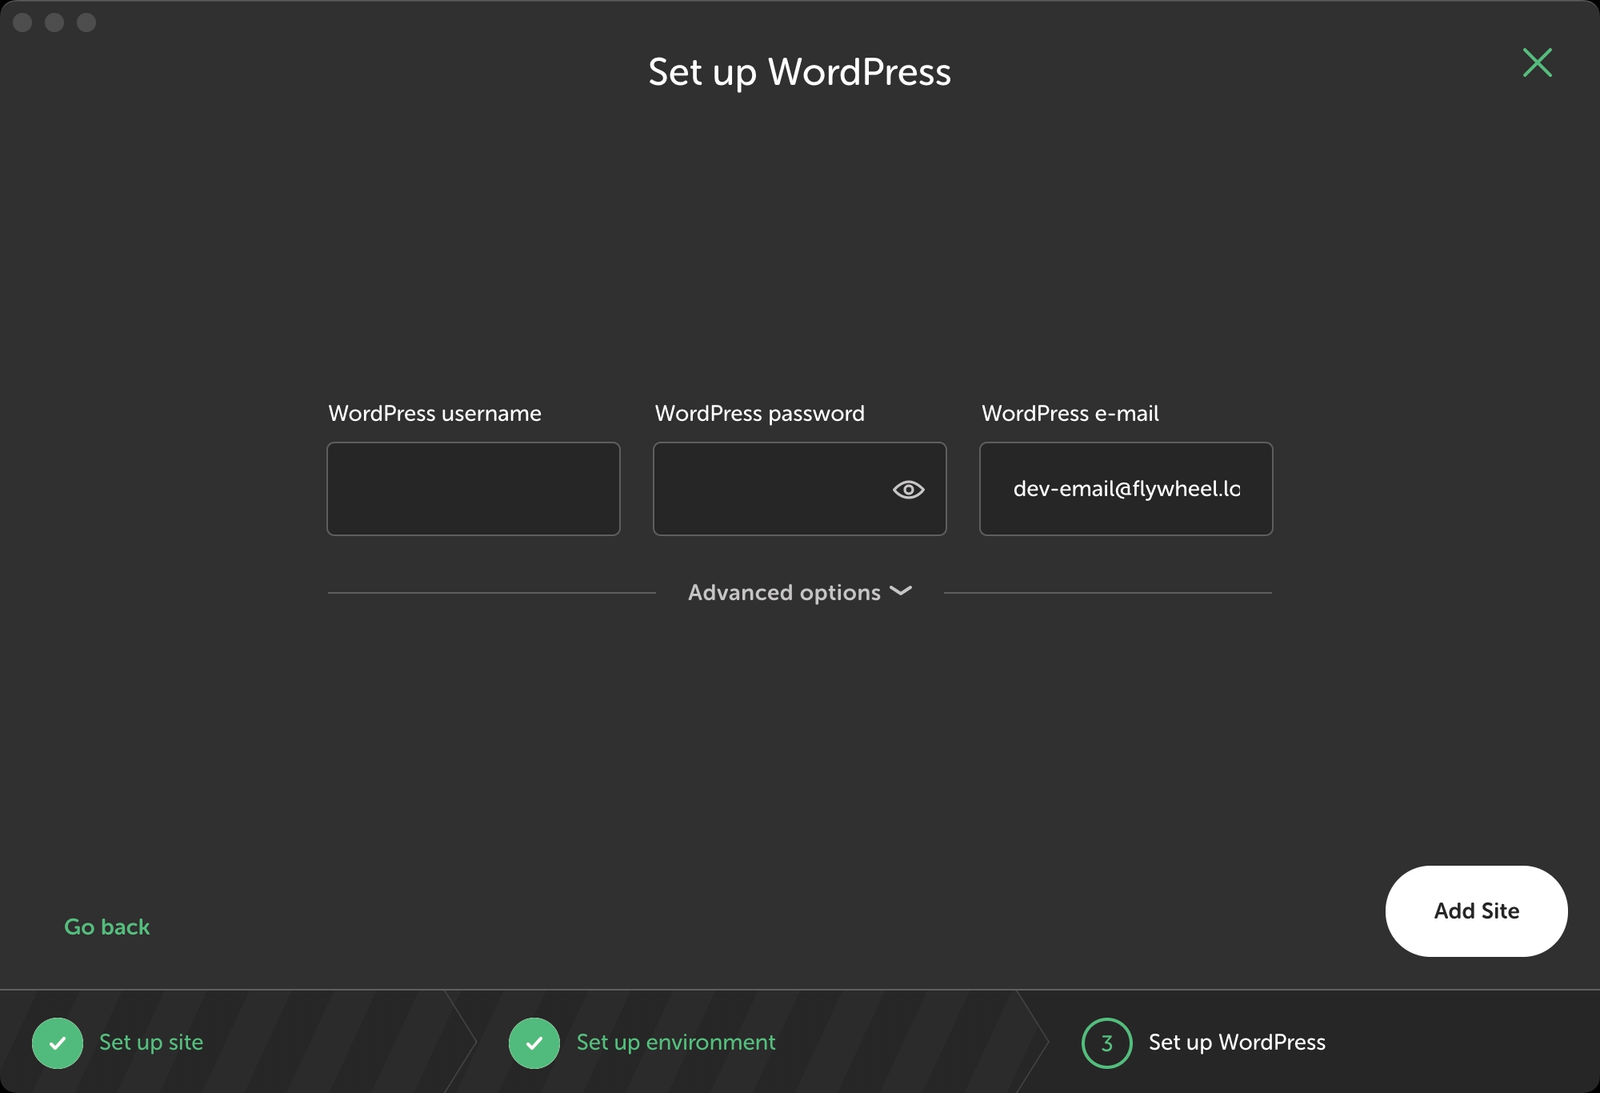 A screenshot of the fourth screen of Local By Flywheel is shown while creating a new site. 

There are two input fields for WordPress Username and WordPress Password.

These details will be used to log into the newly created WordPress site.